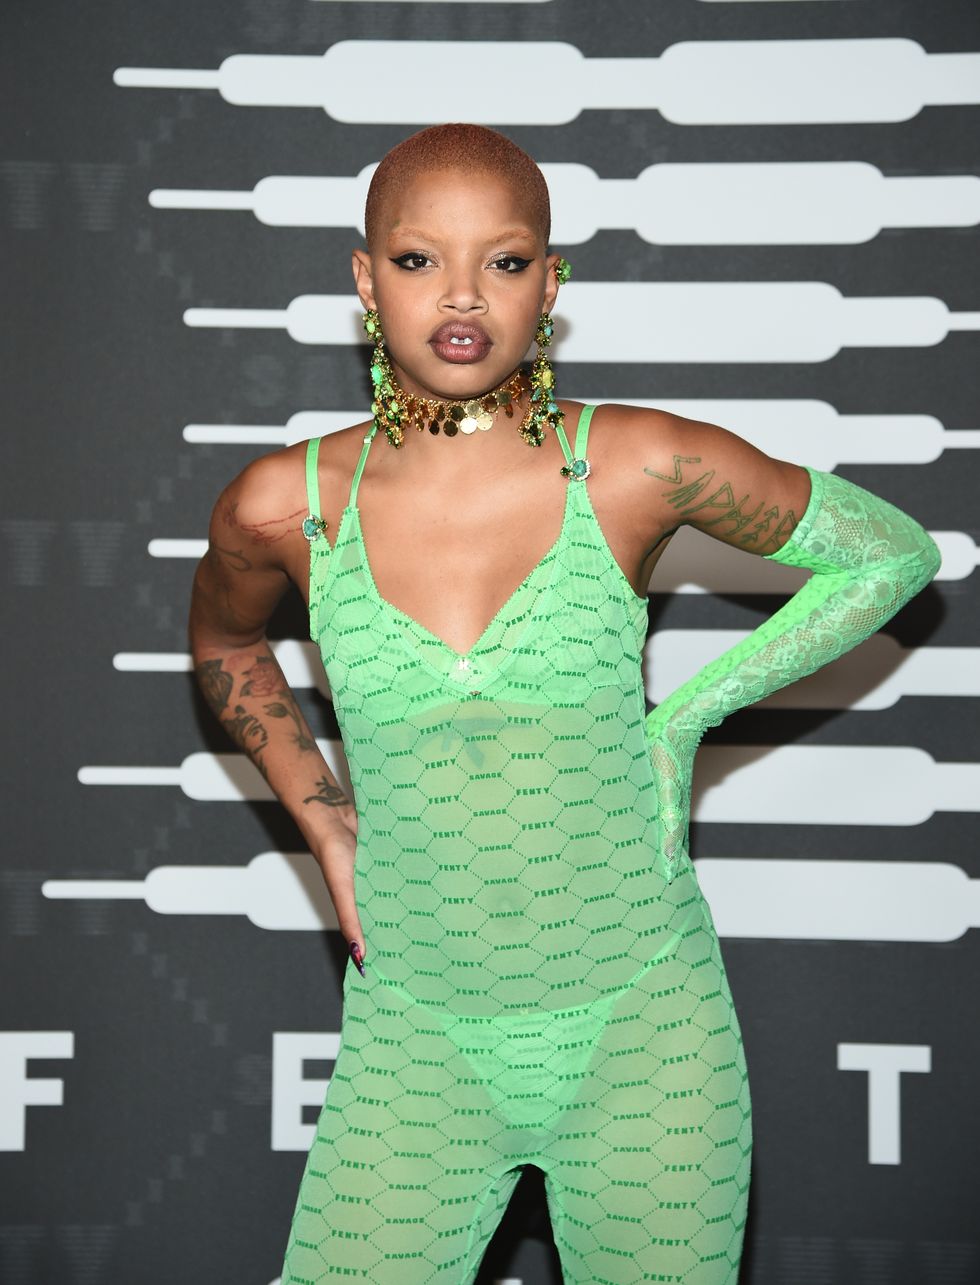 Rihanna's Savage X Fenty at Fashion Week: See All the A-List Guests